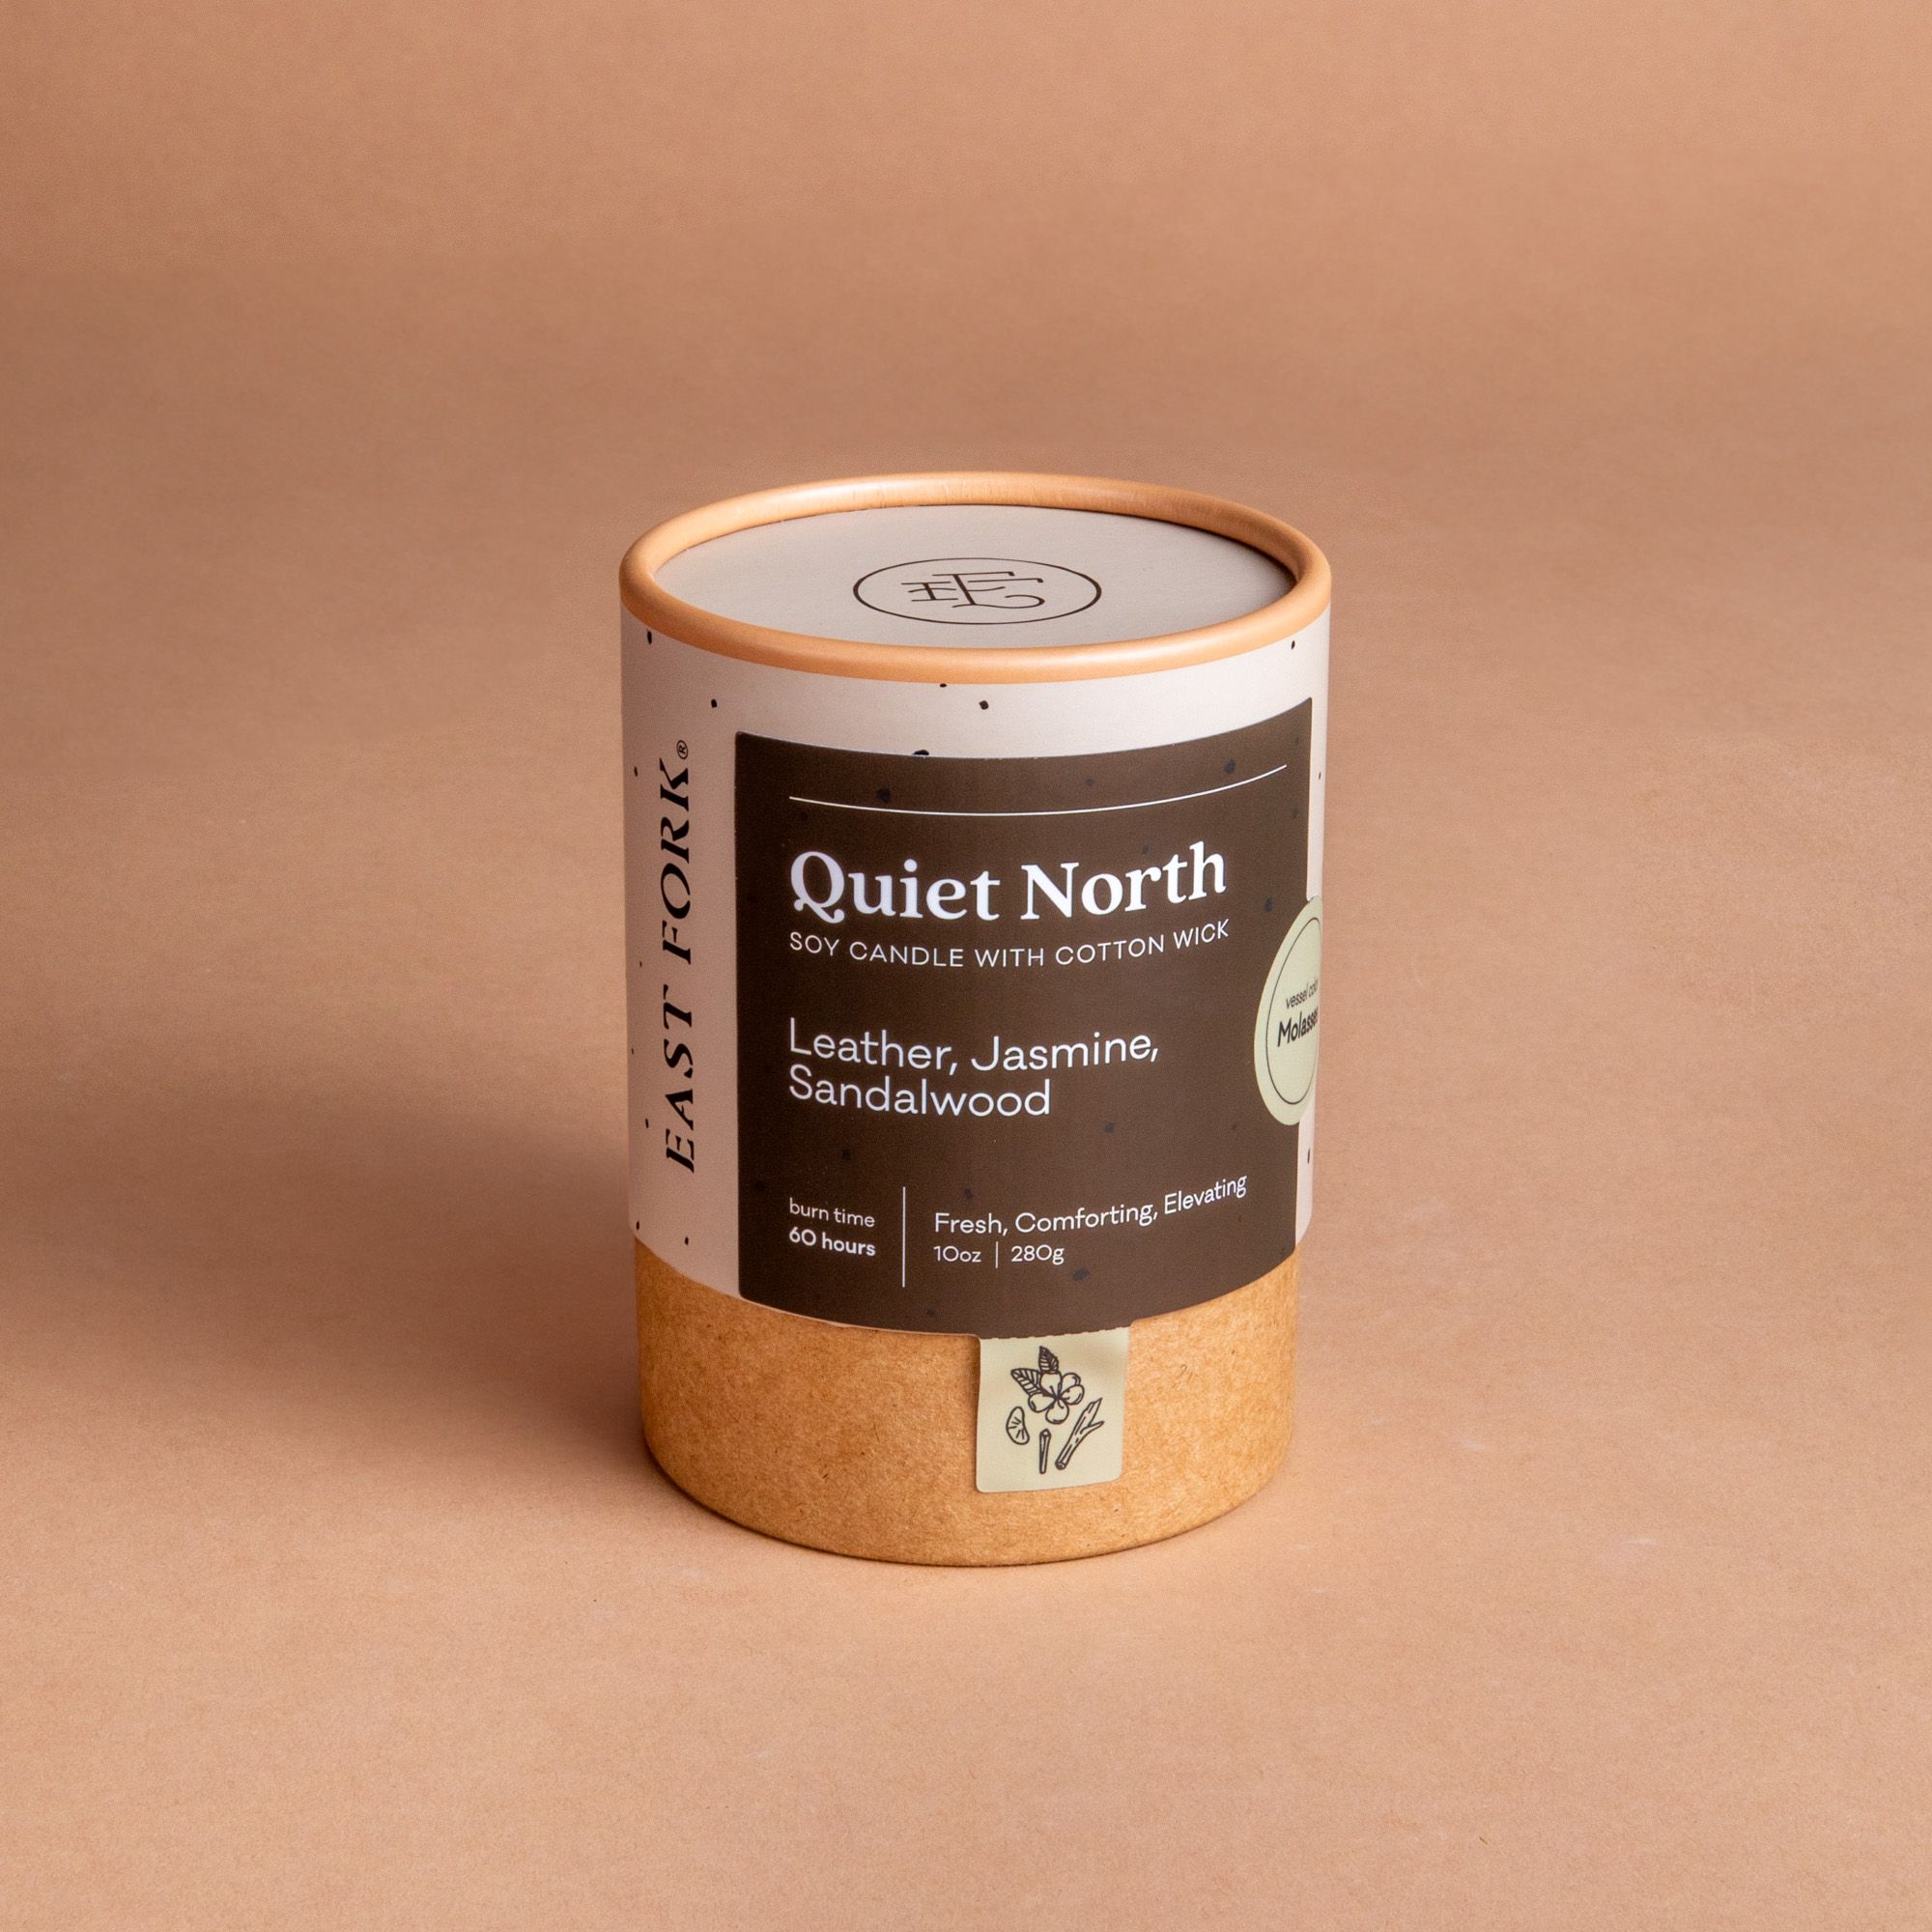 Large cardboard packaging tube with a candle inside with branding on it that says 'Quiet North'